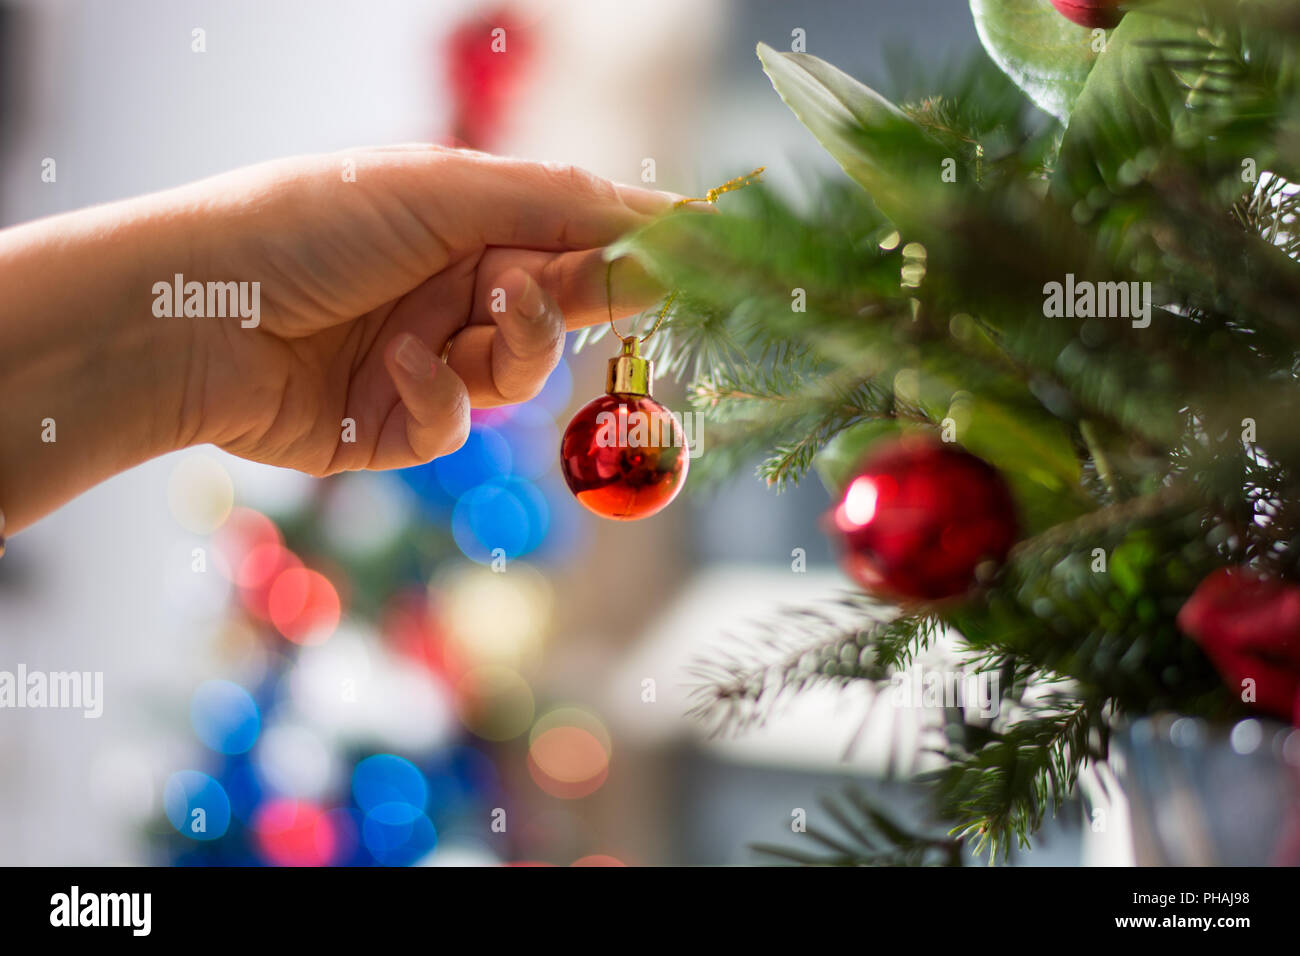 Decorating Christmass bouqet  with red ornaments and tree branches Stock Photo